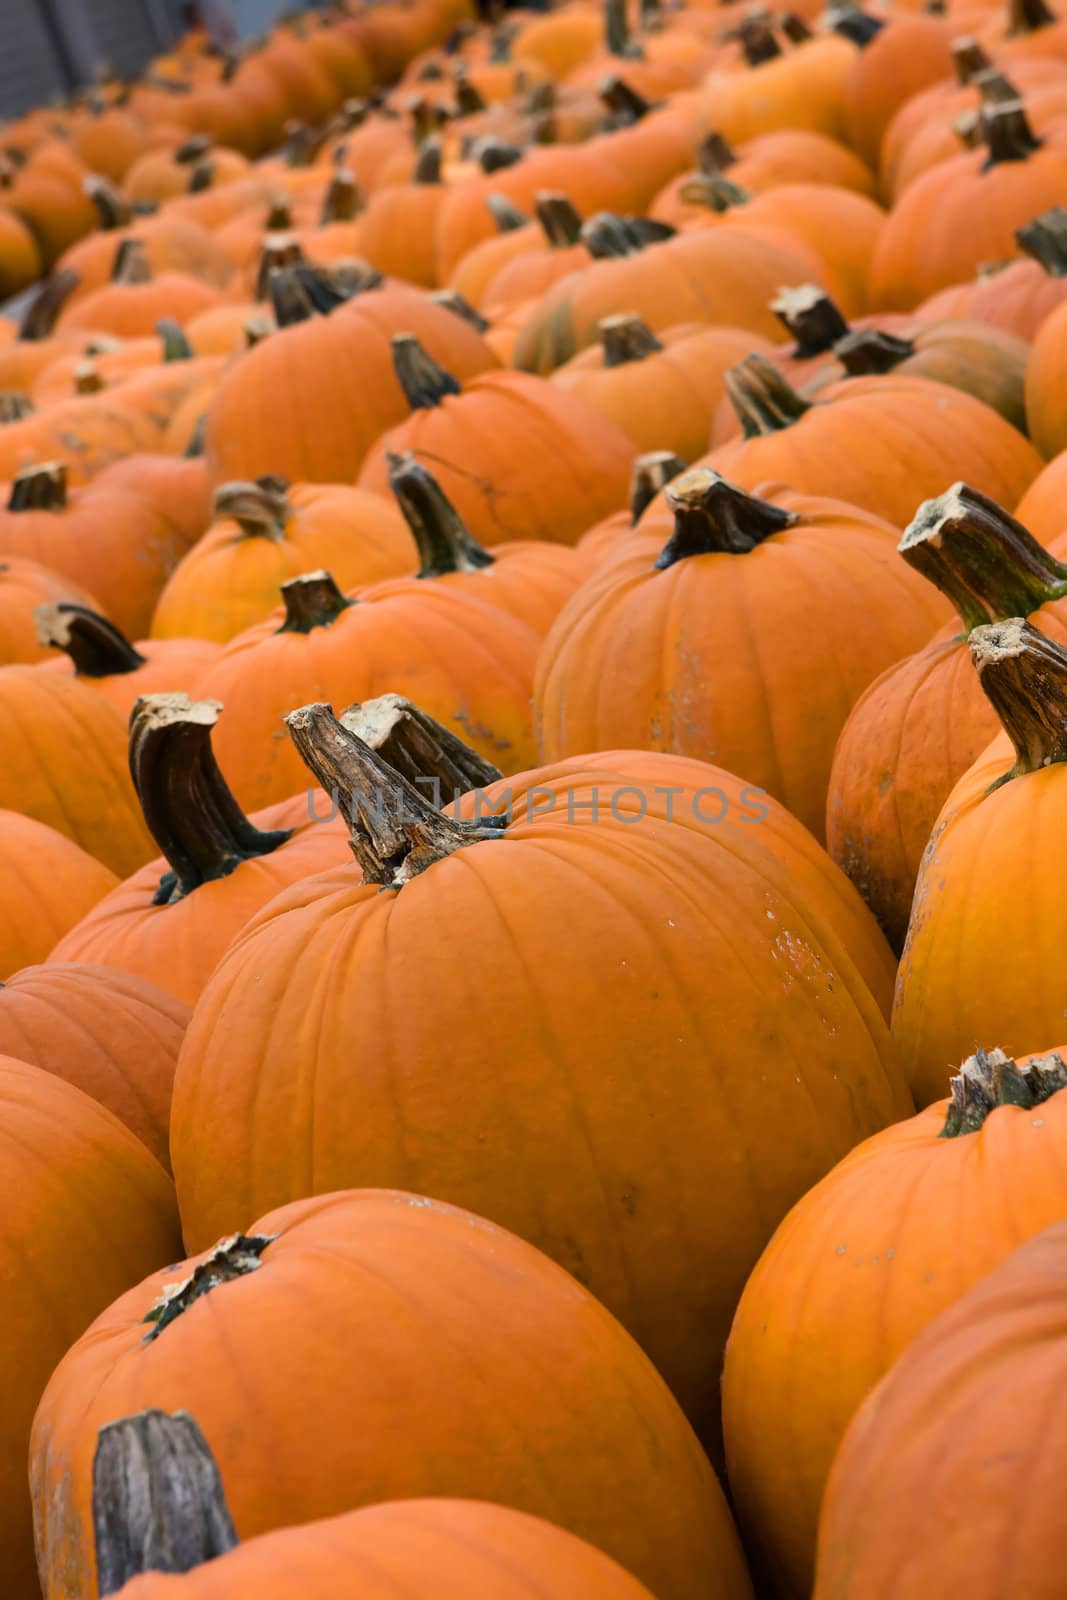 Pumpkins lines up during the Halloween holiday.